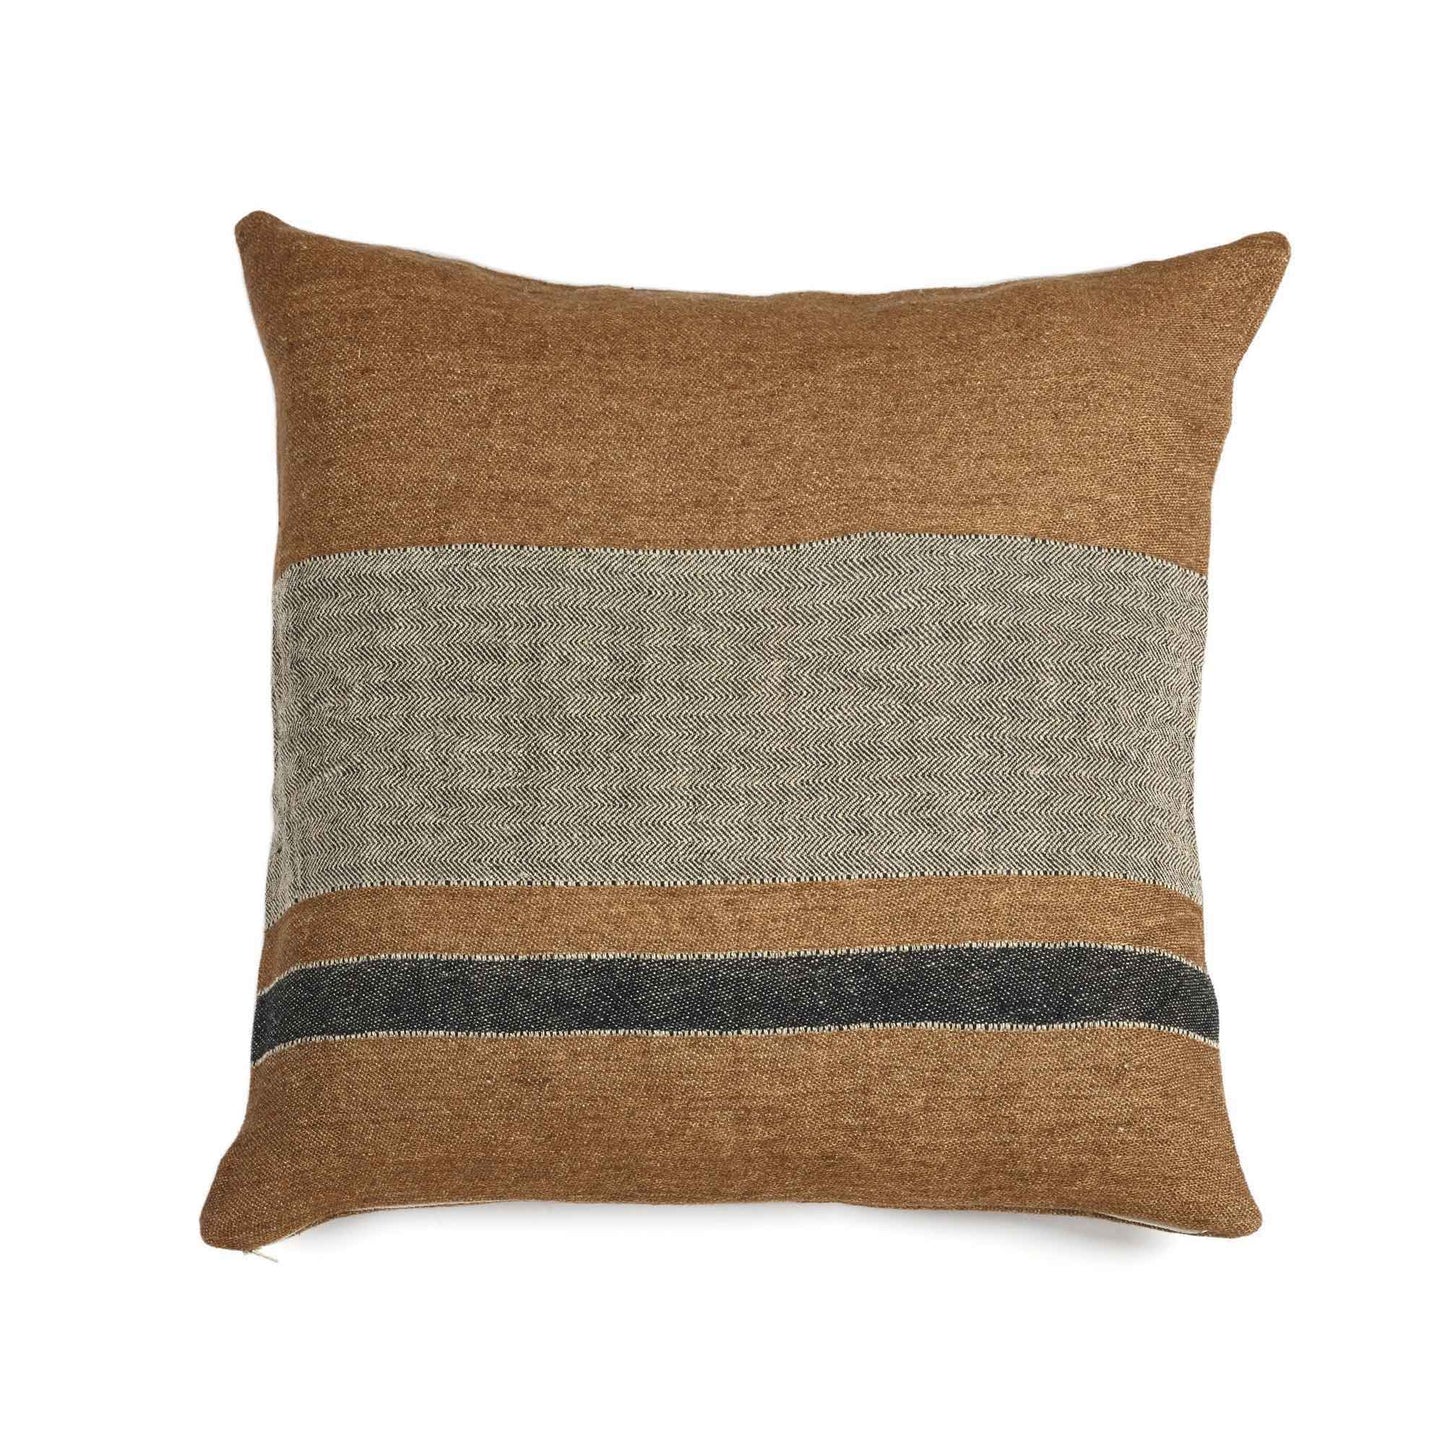 Belgian Linen Throw Pillow Cover by Libeco